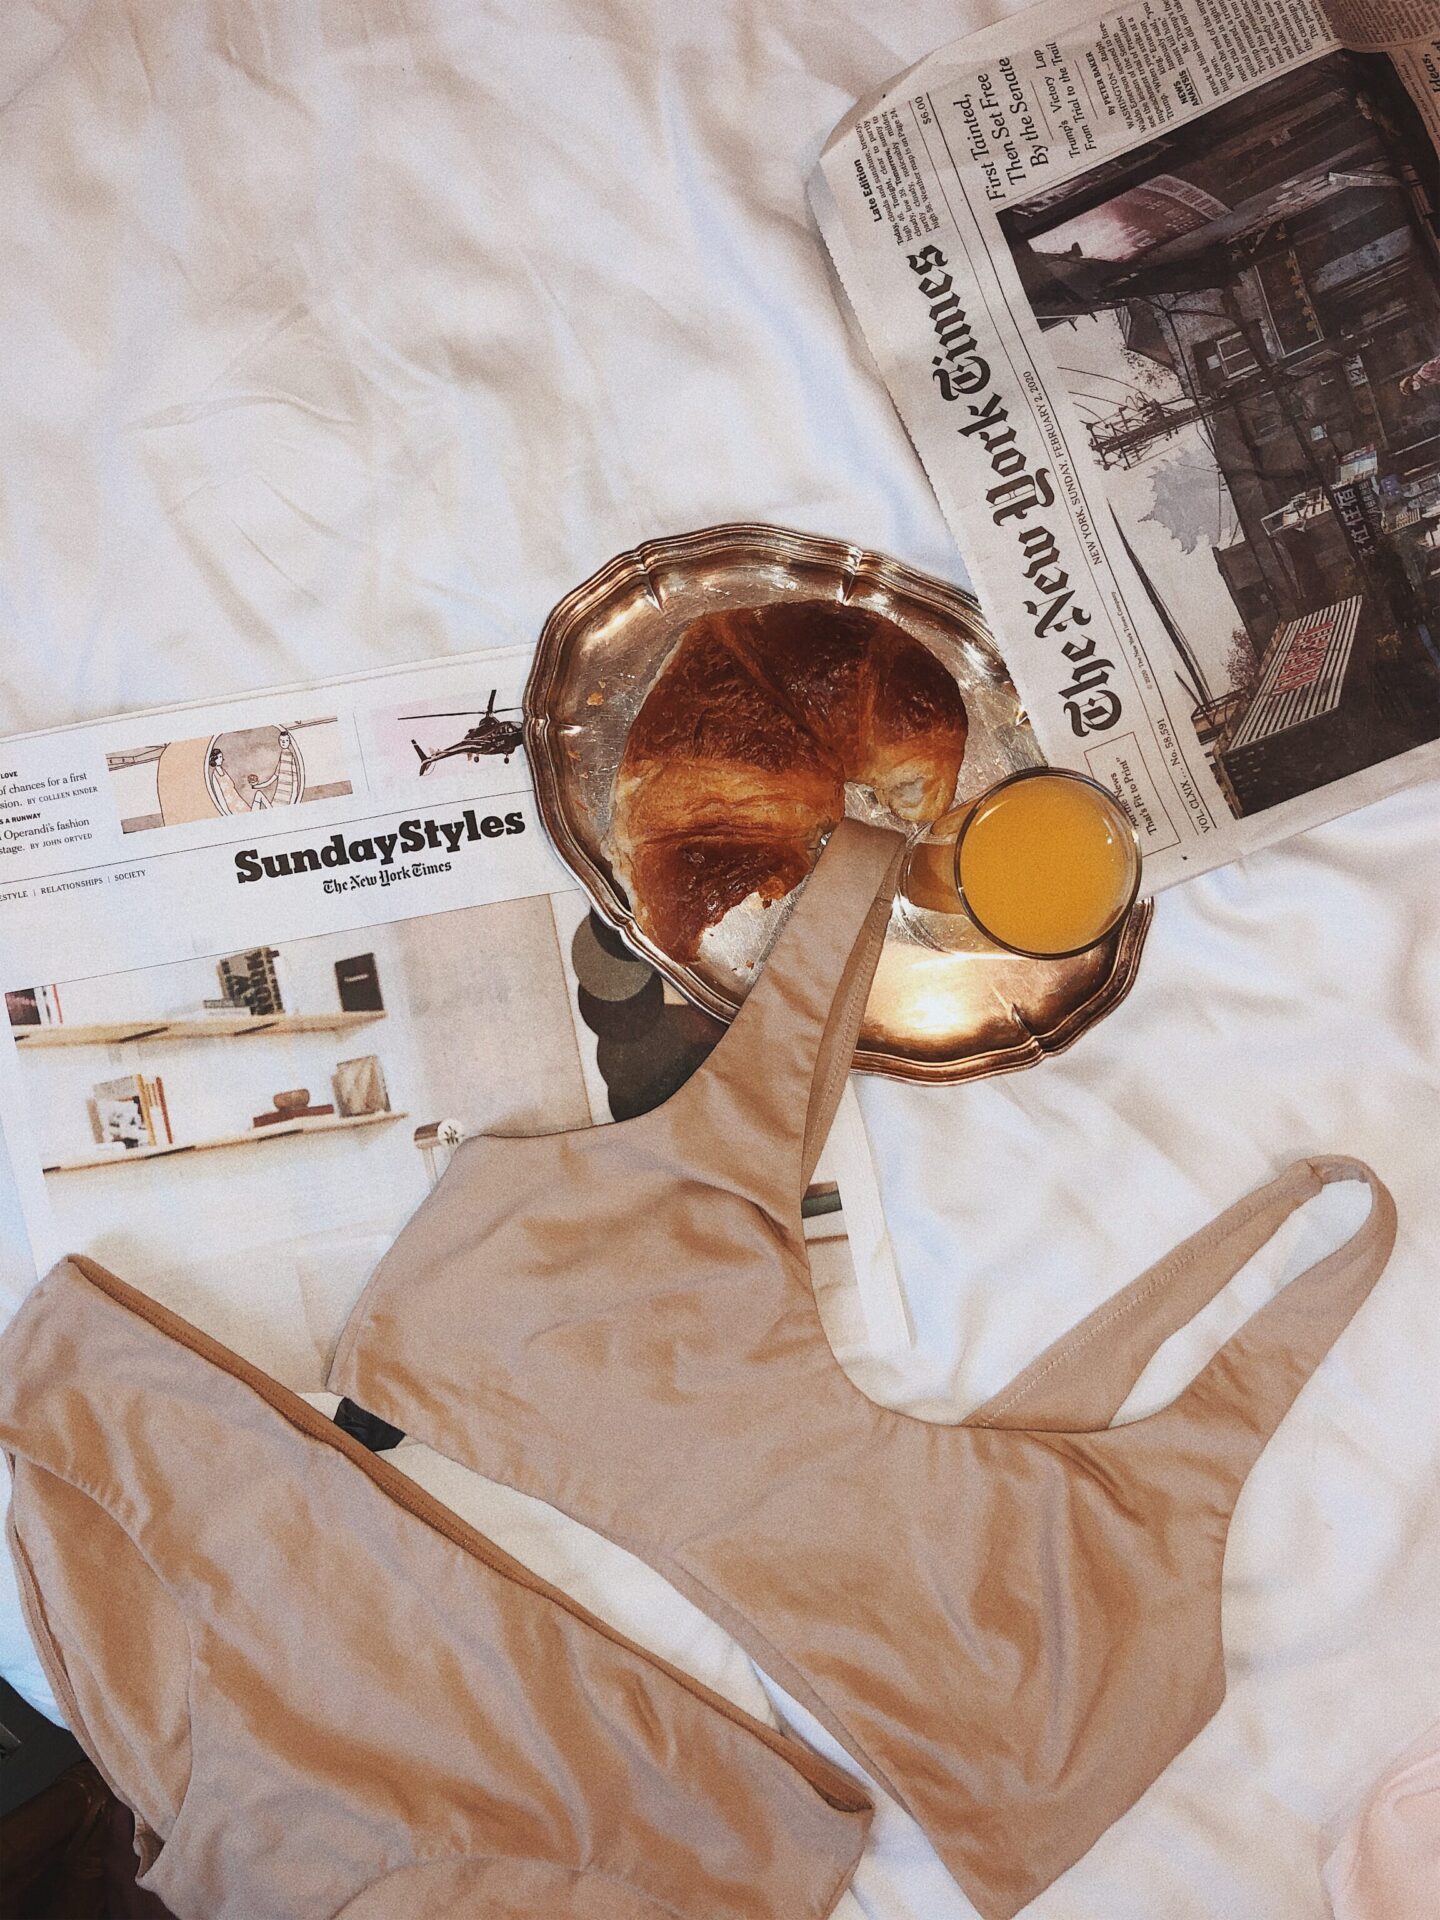 bra and underwear with a newspaper and breakfast